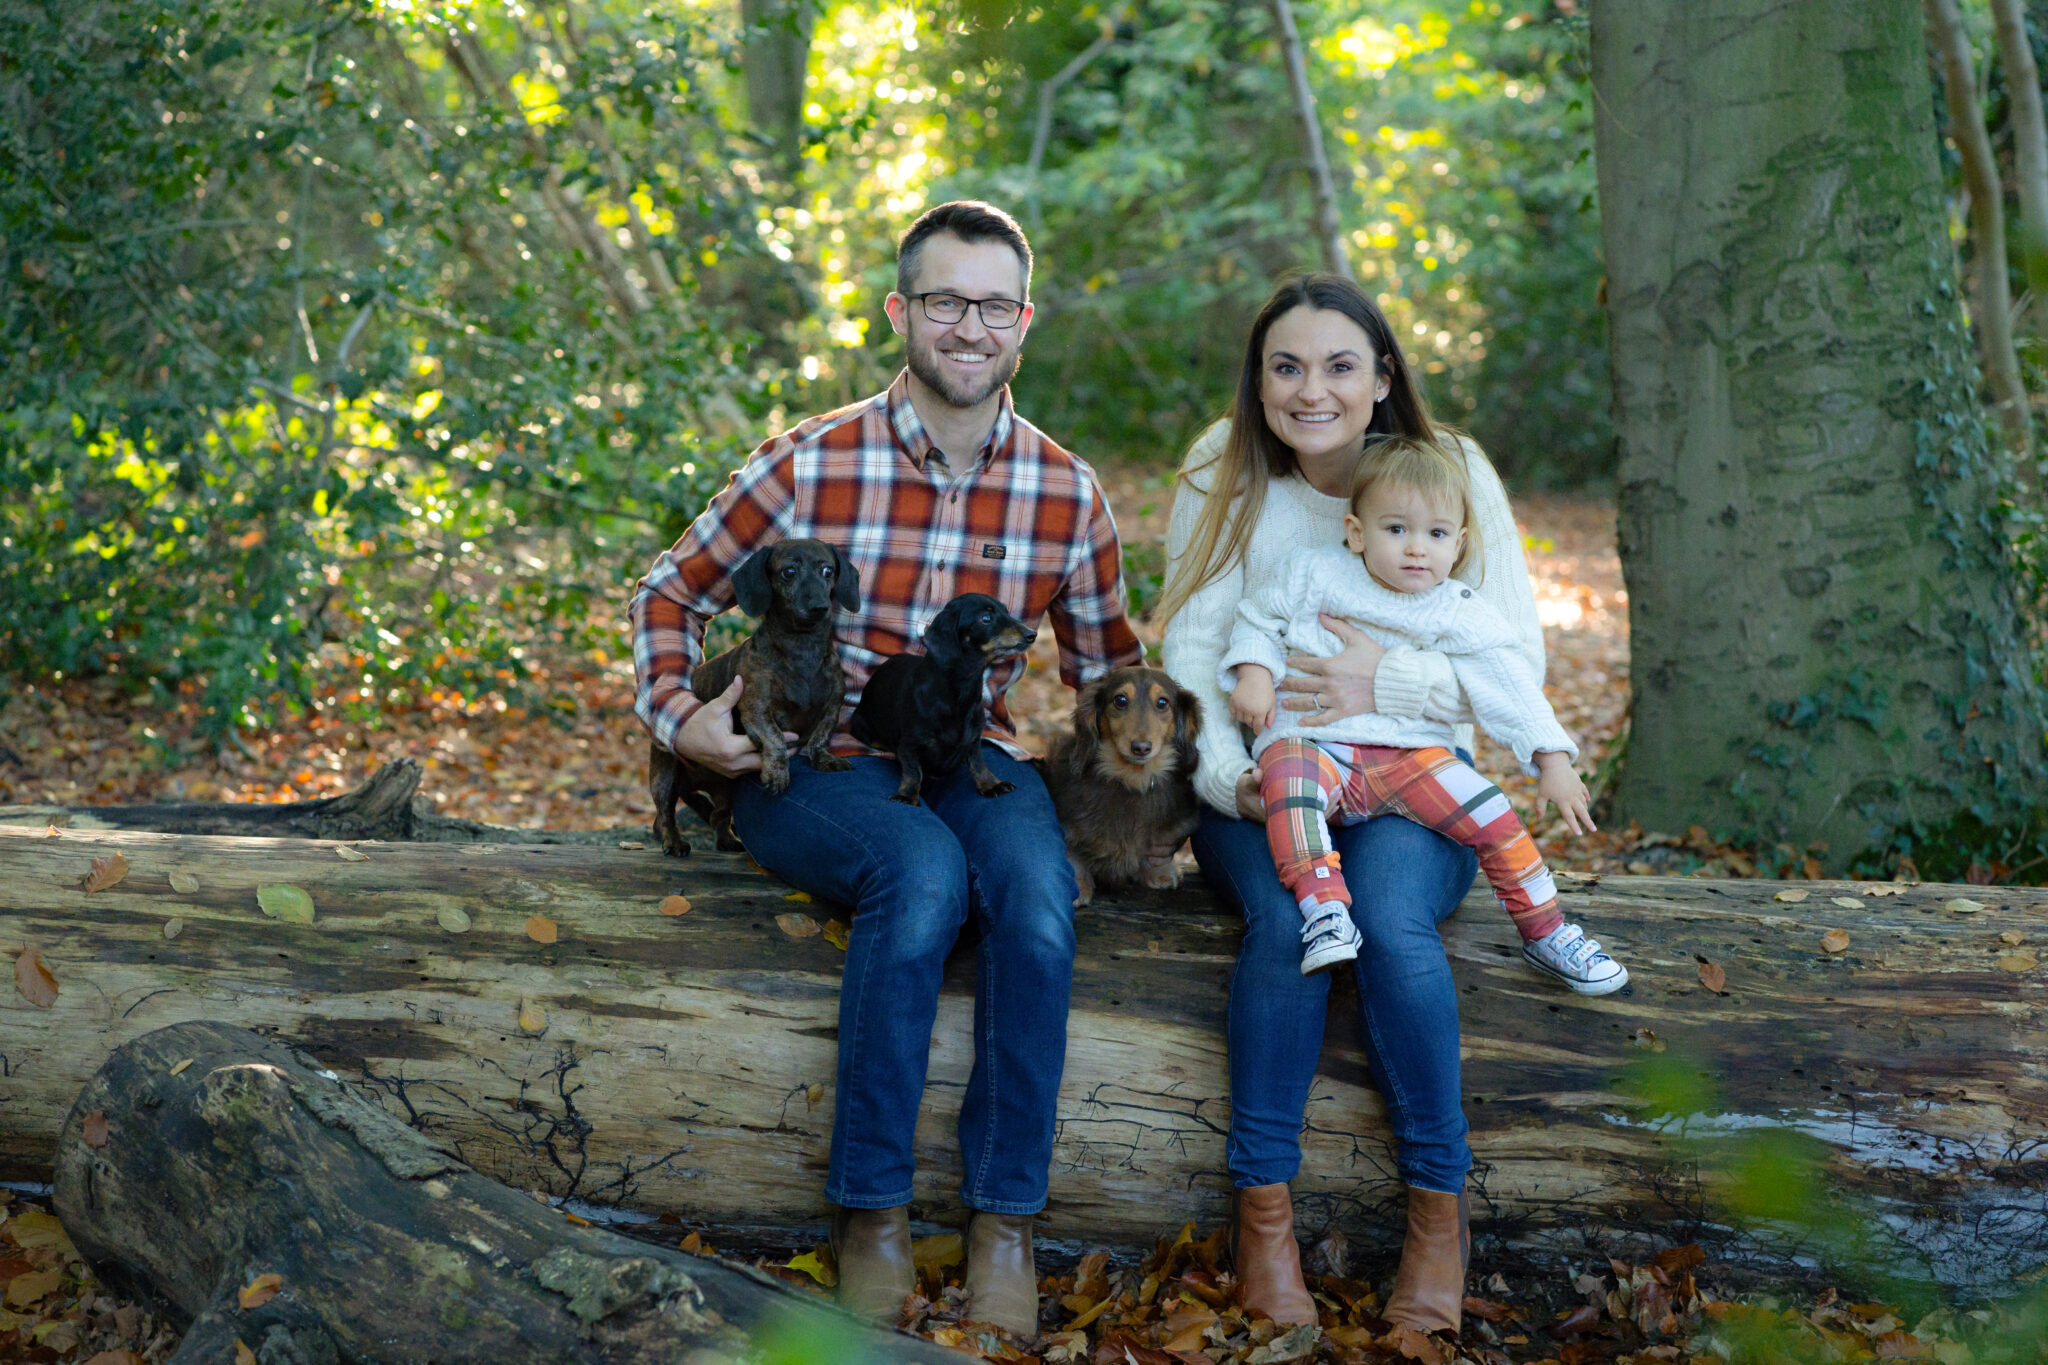 Studio & woodland photo session package